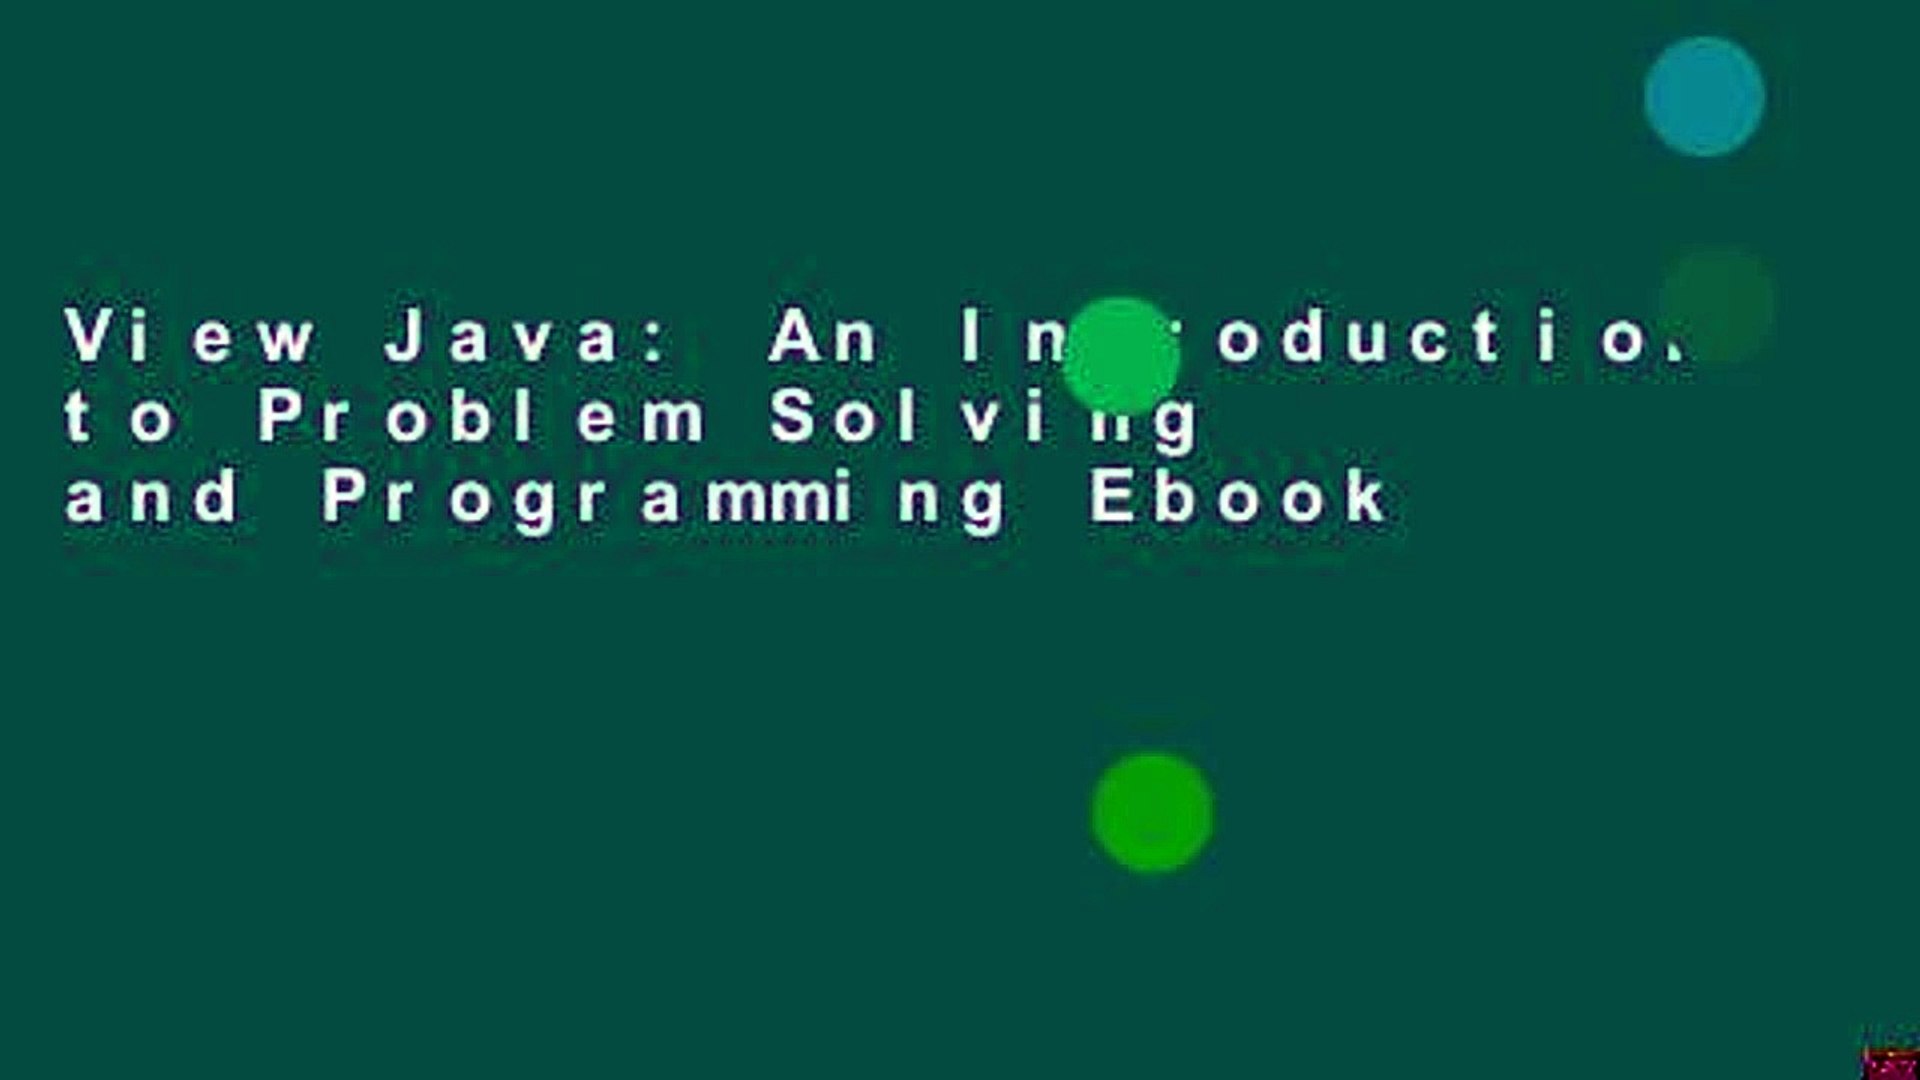 View Java: An Introduction to Problem Solving and Programming Ebook